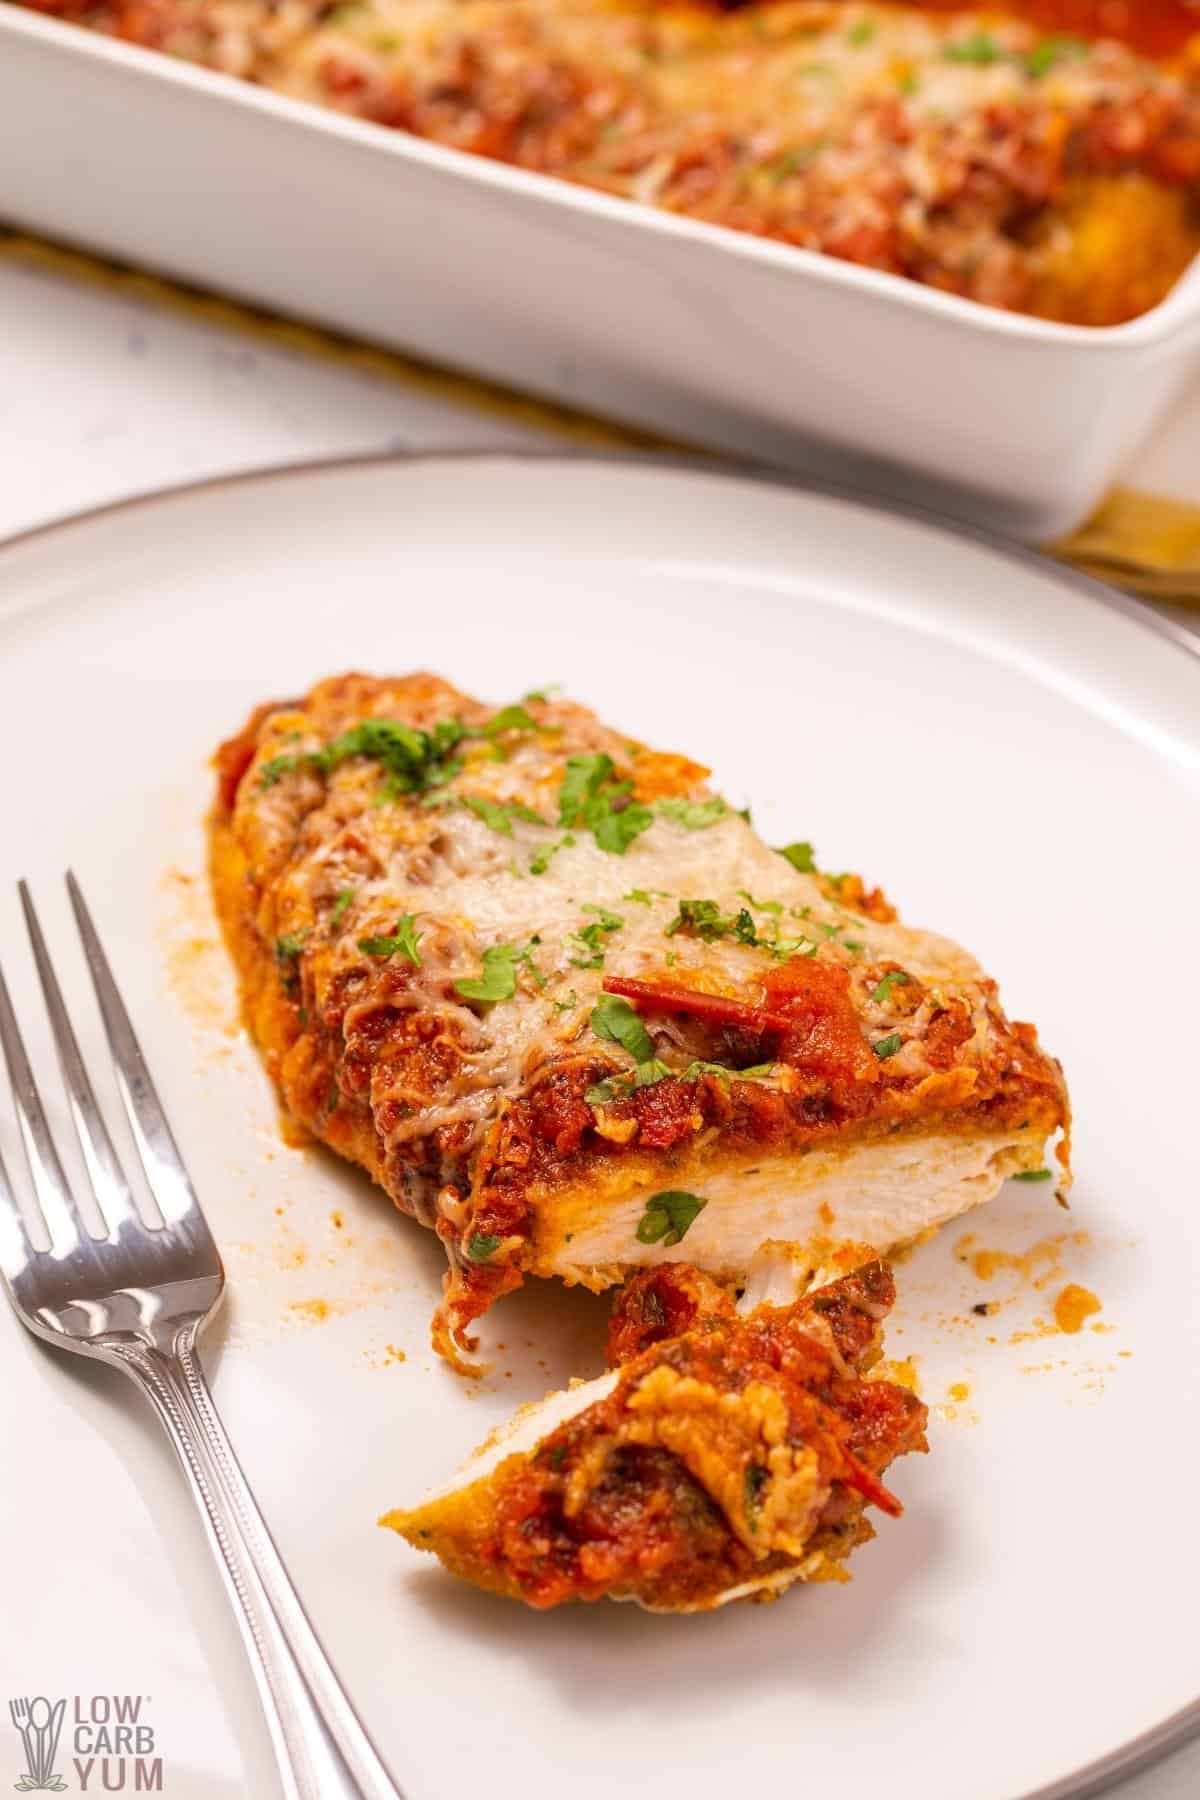 chicken parmesan sliced on plate to enjoy for proteins on keto diet